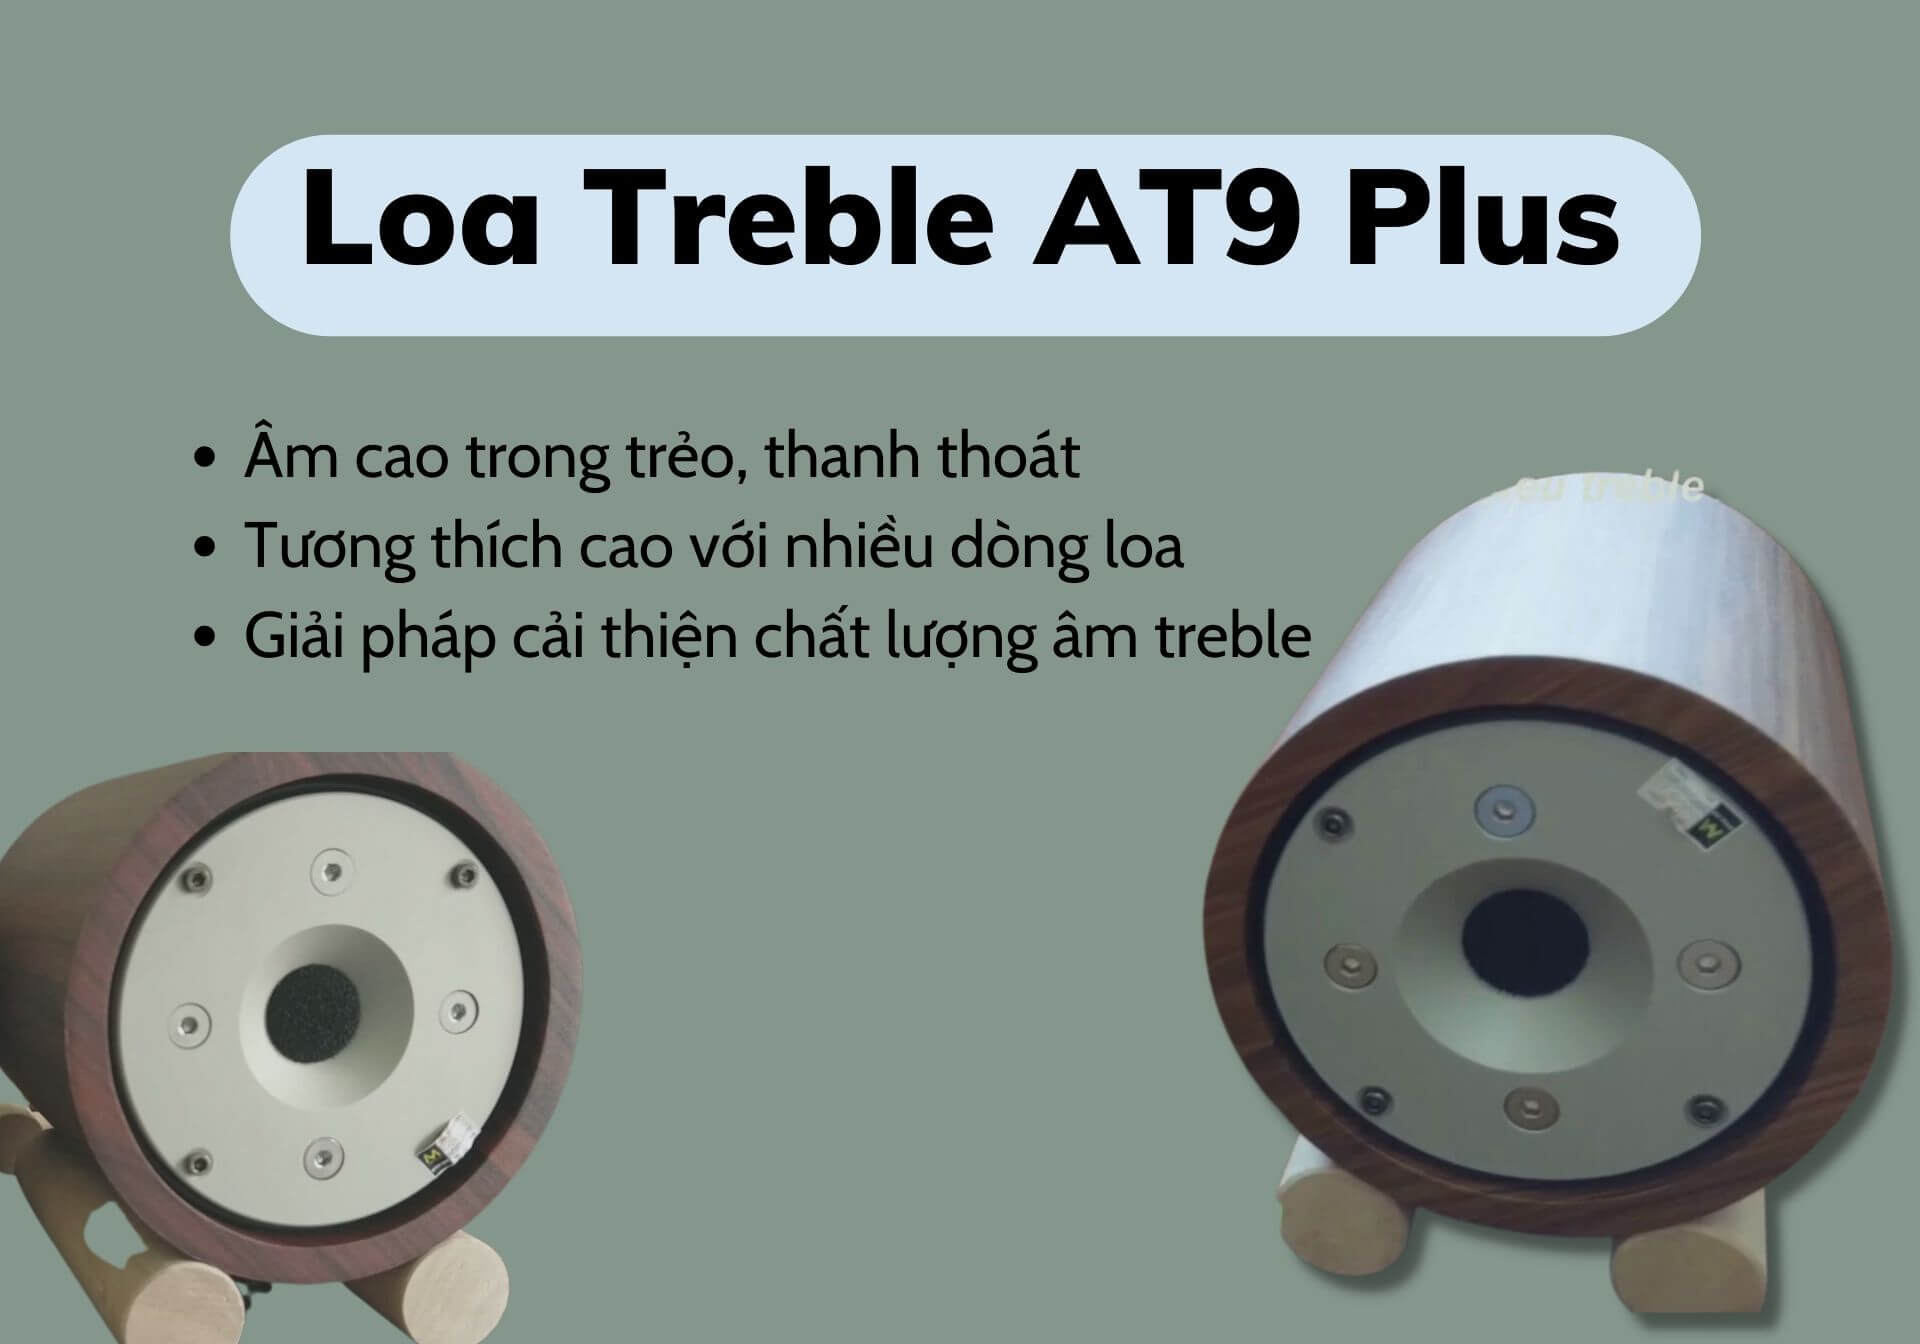 danh gia loa treble at9 ve chat luong am thanh